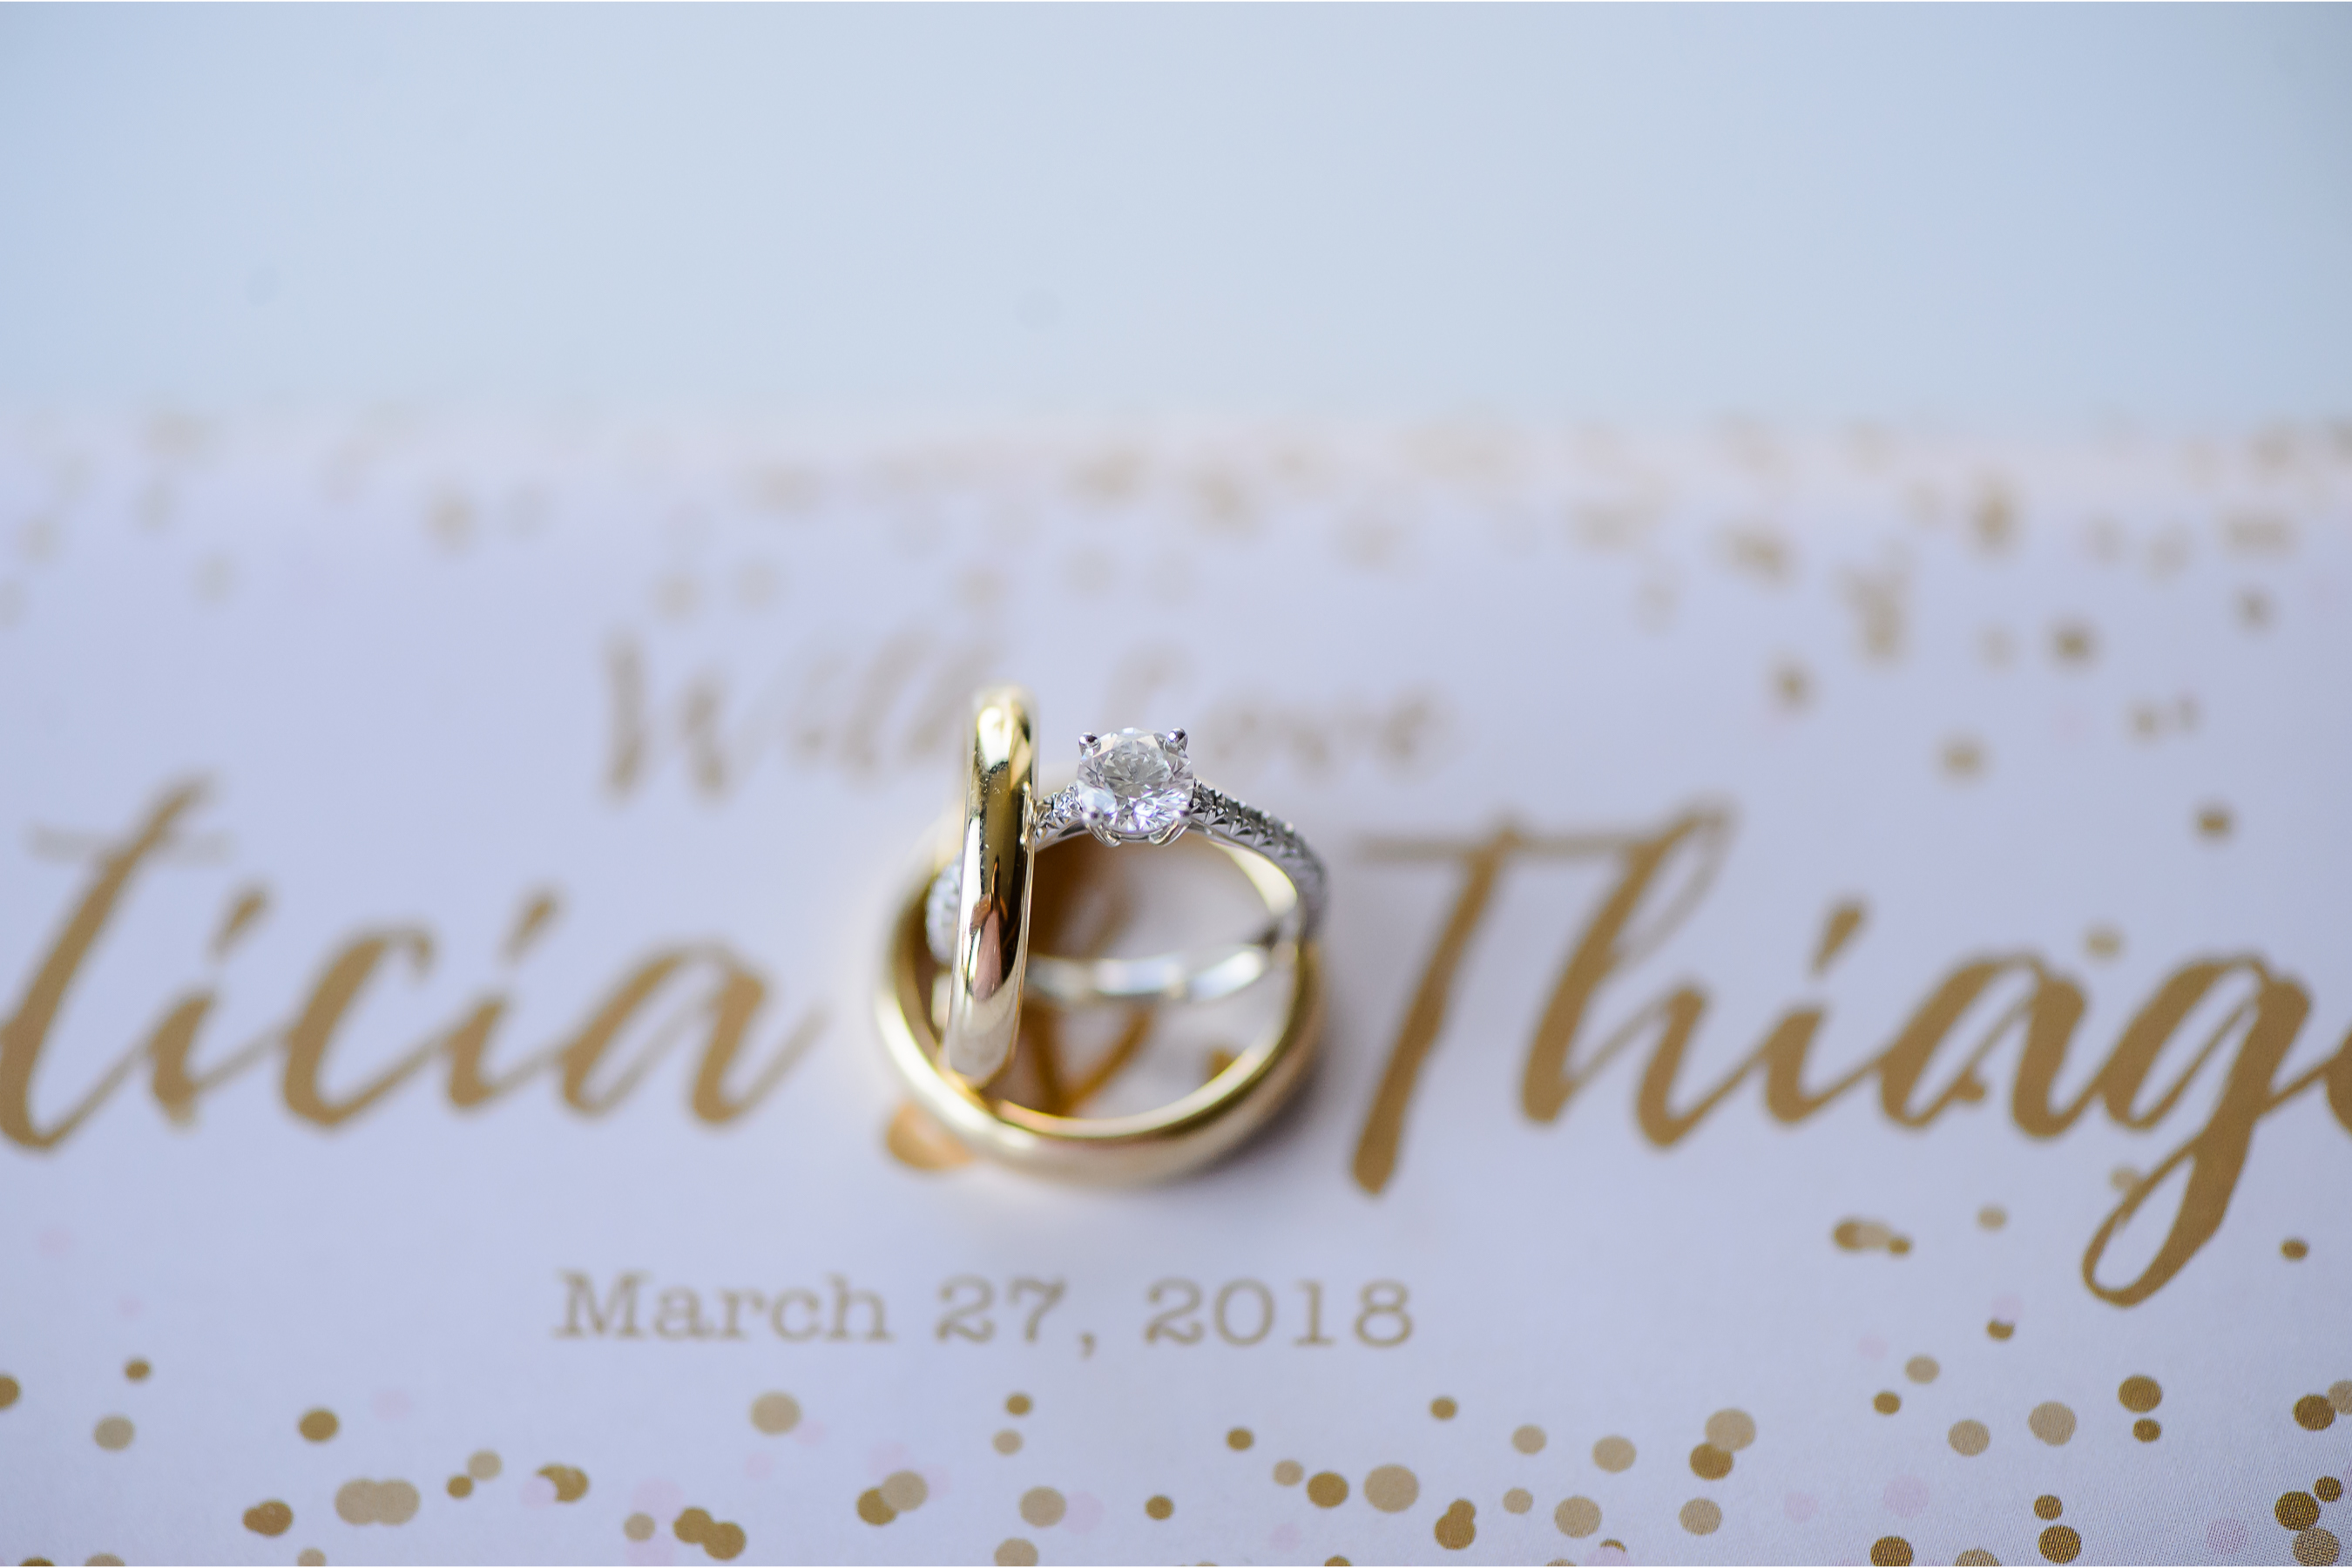 Wedding ring from a San Jose elopement photographed from California based wedding photographer Benson Lau Photographer.